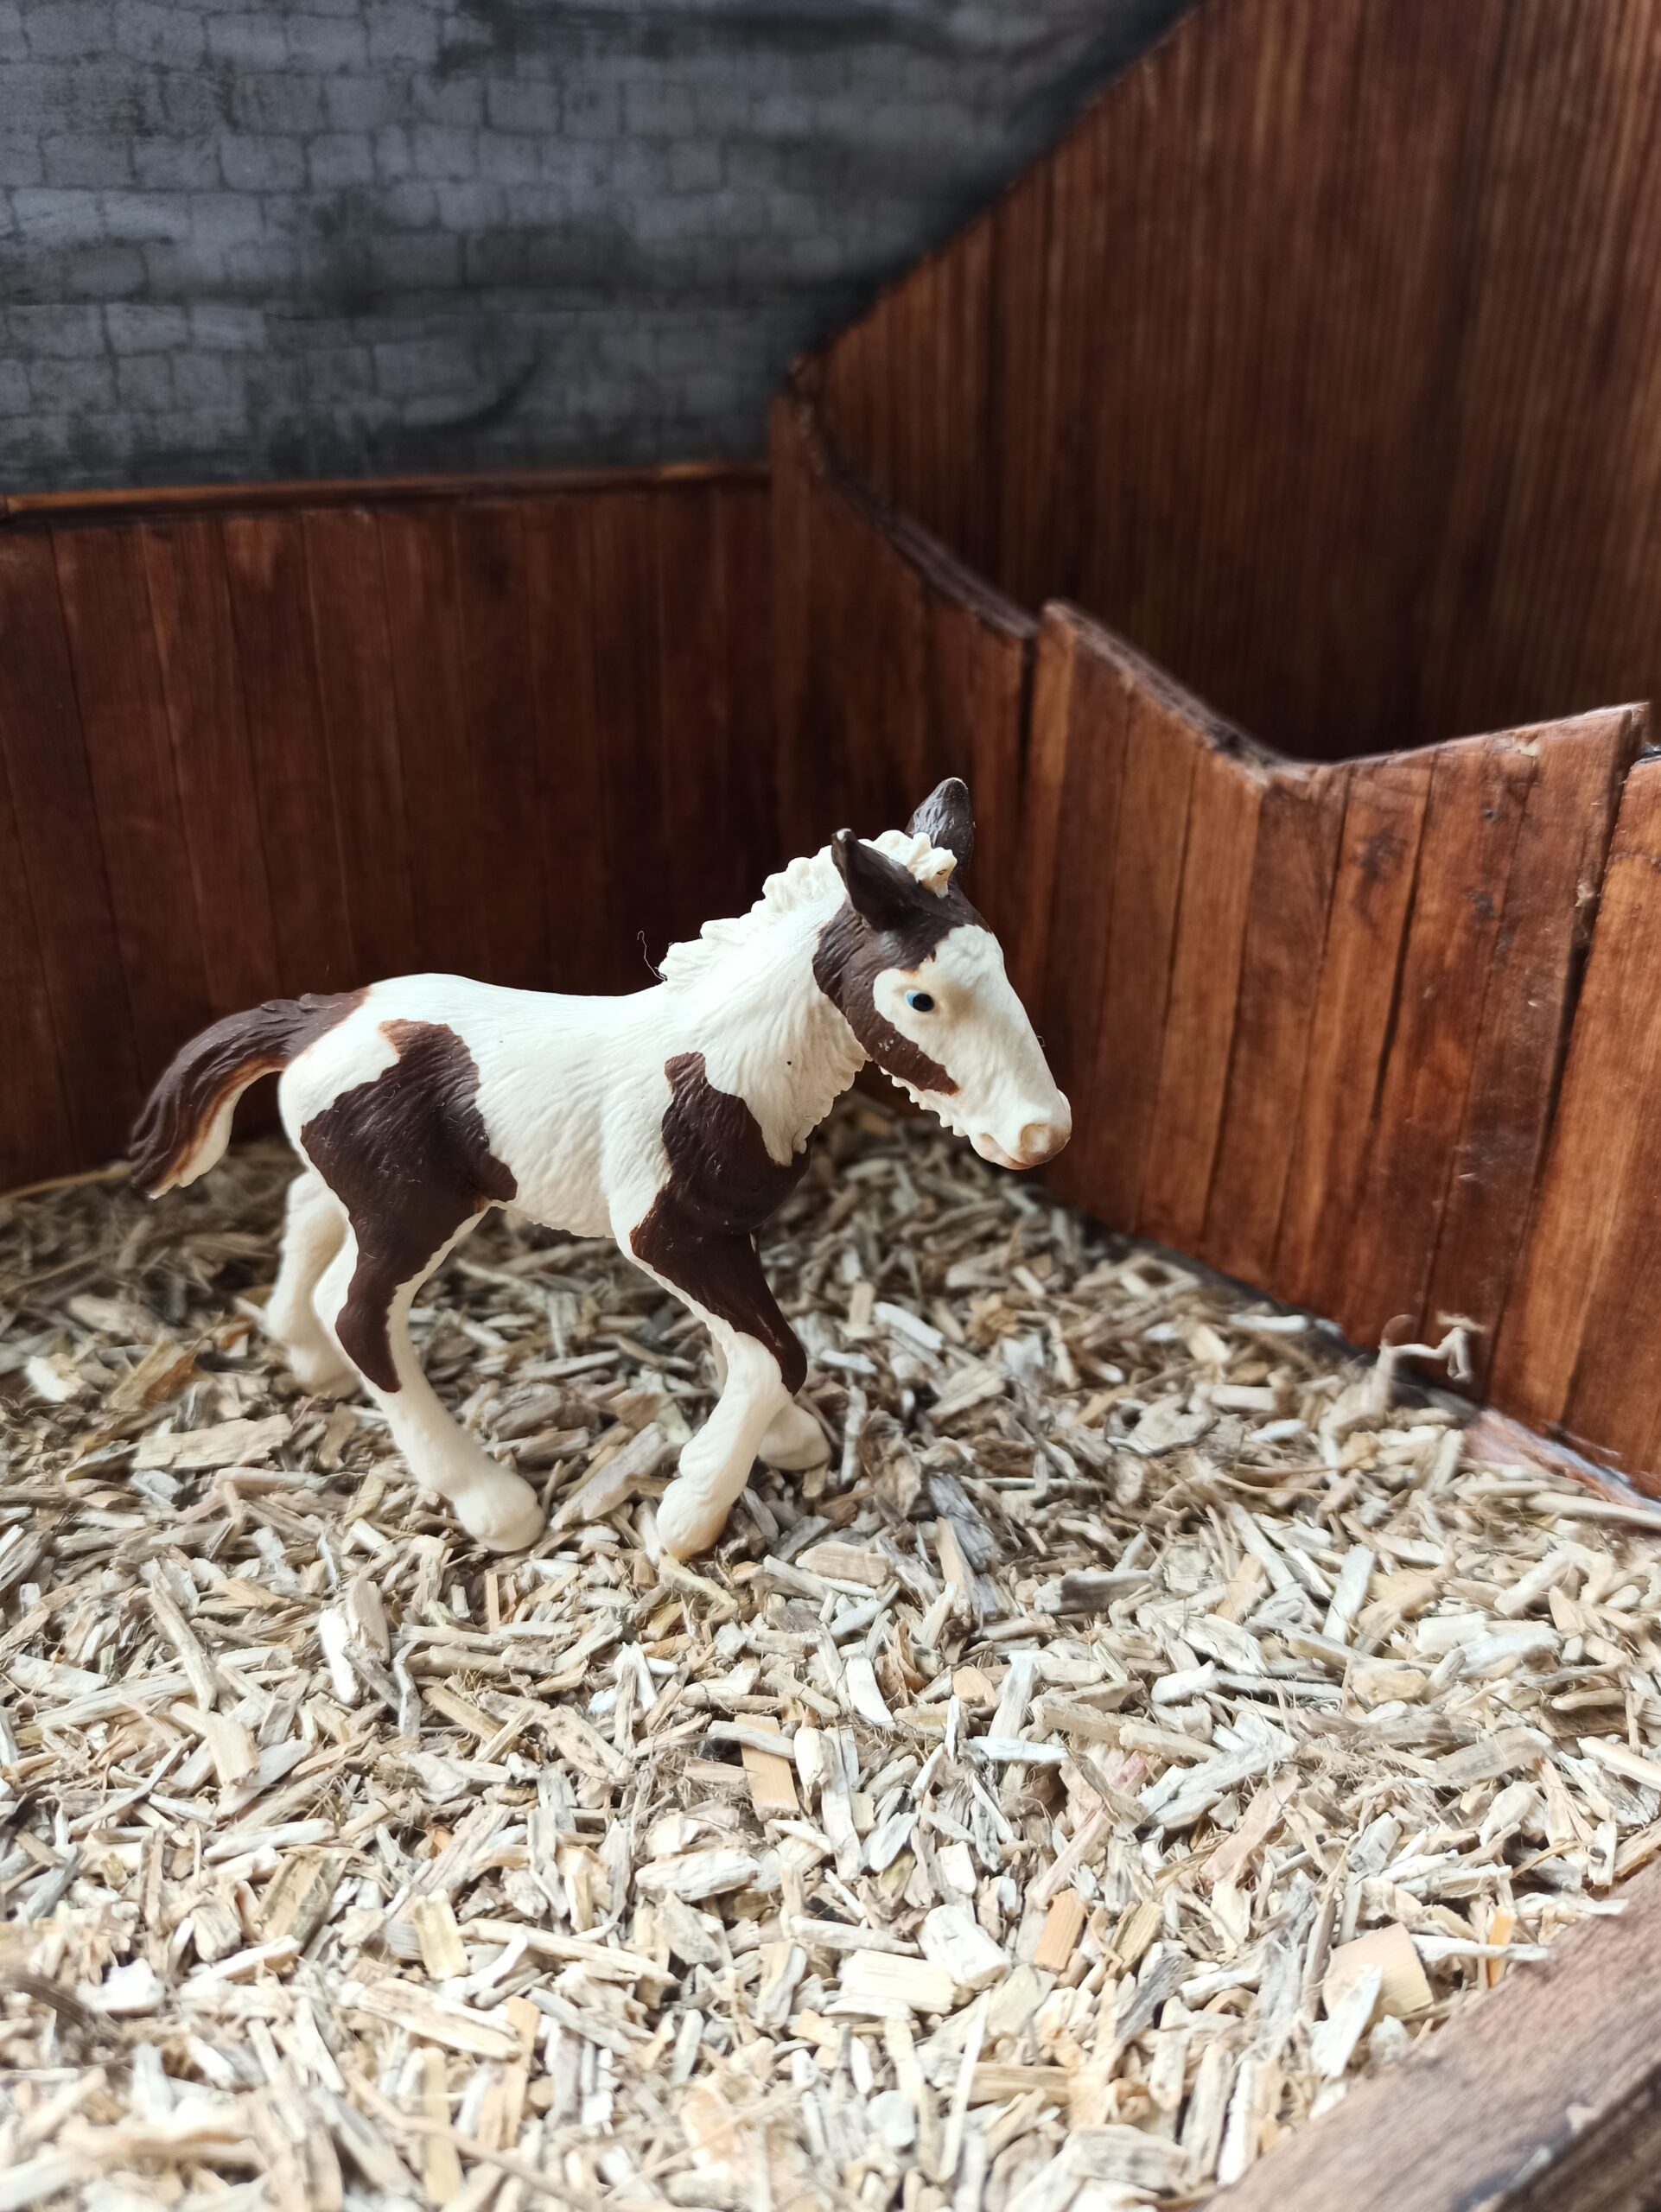 NEW WITH TAGS Schleich Tinker Foal Horse #13295 RETIRED 